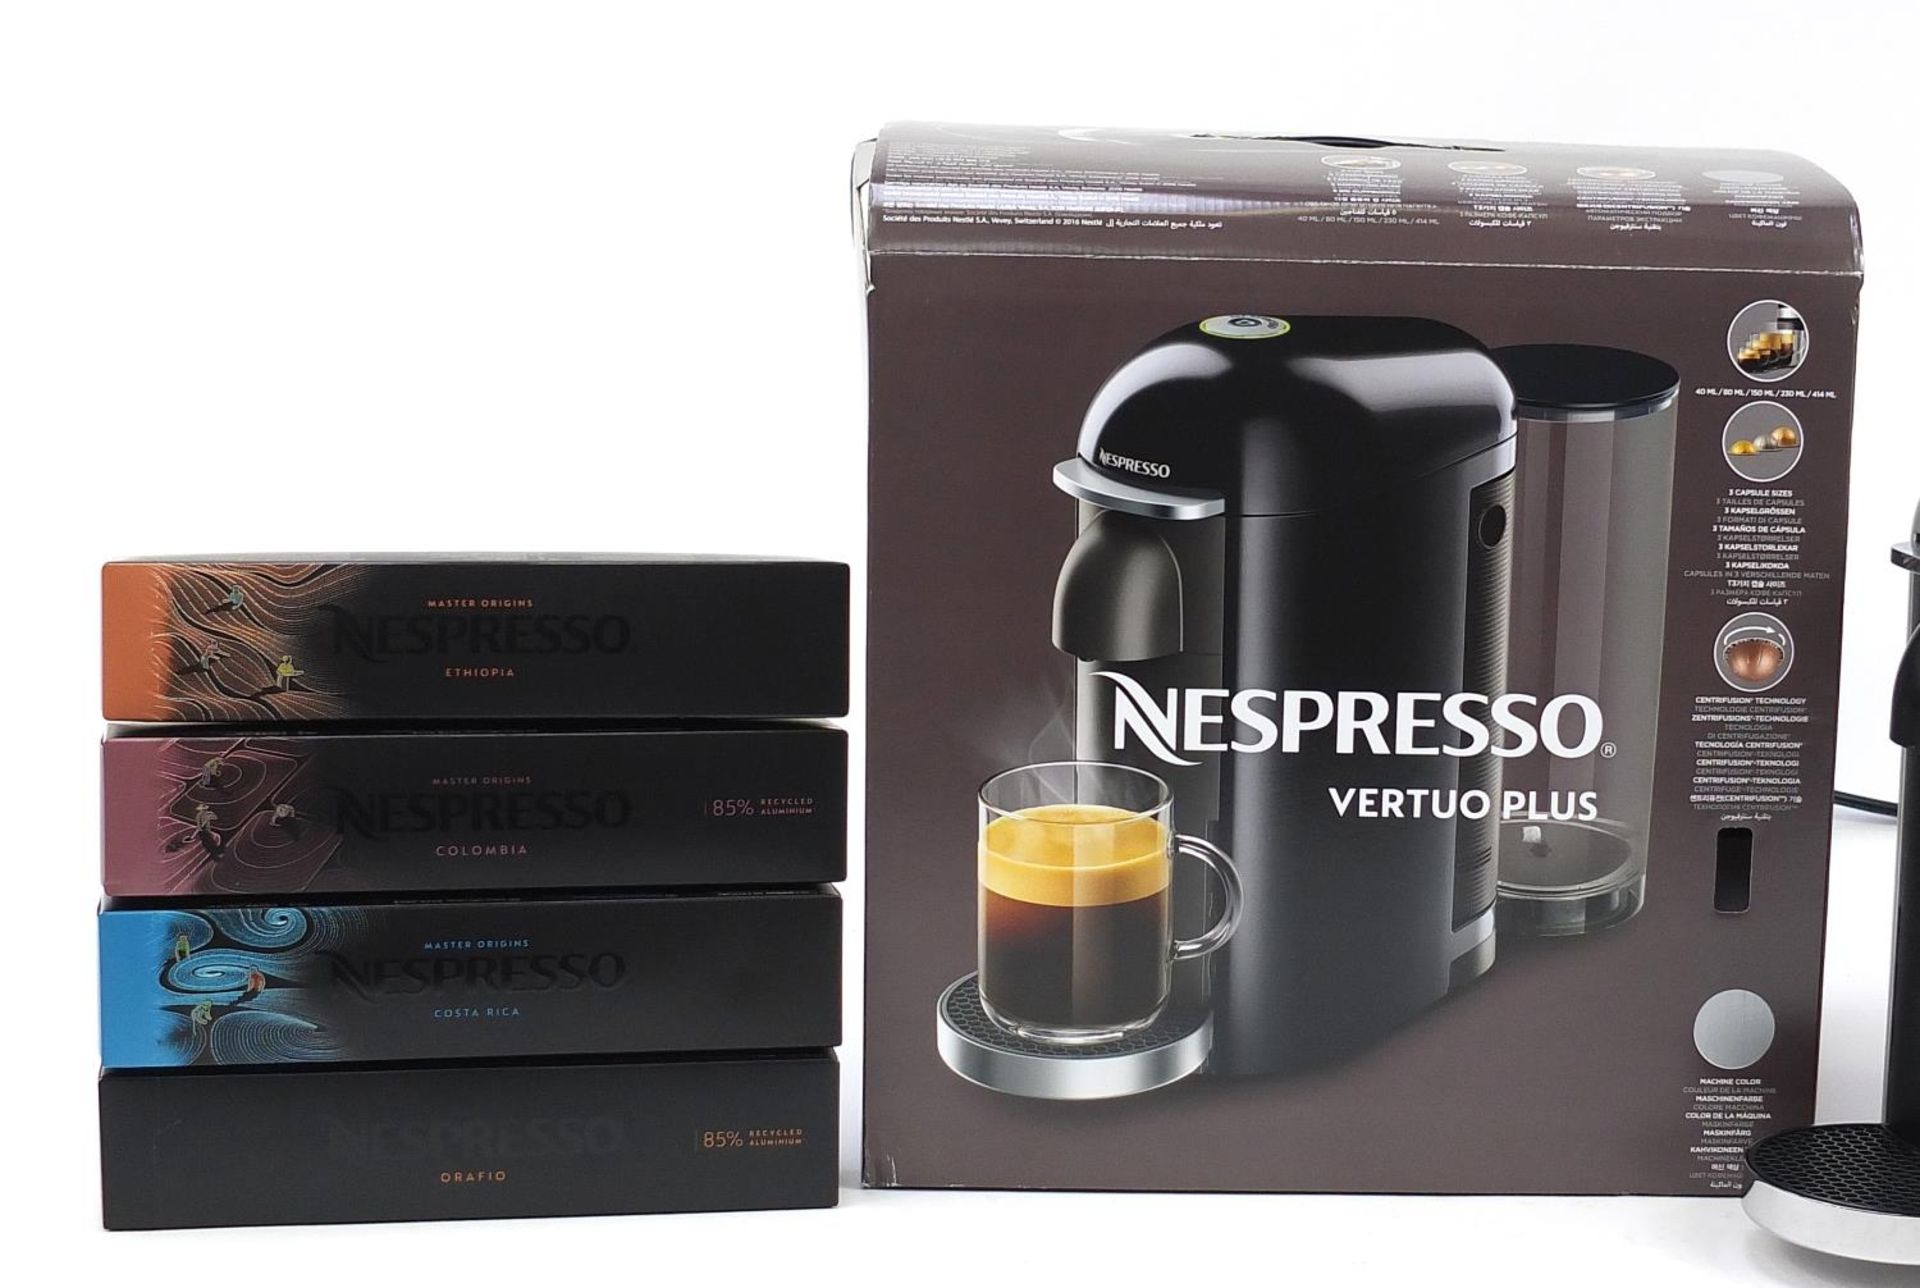 Nespresso Vertuo Plus coffee machine with box and four packets of pods - Image 2 of 4